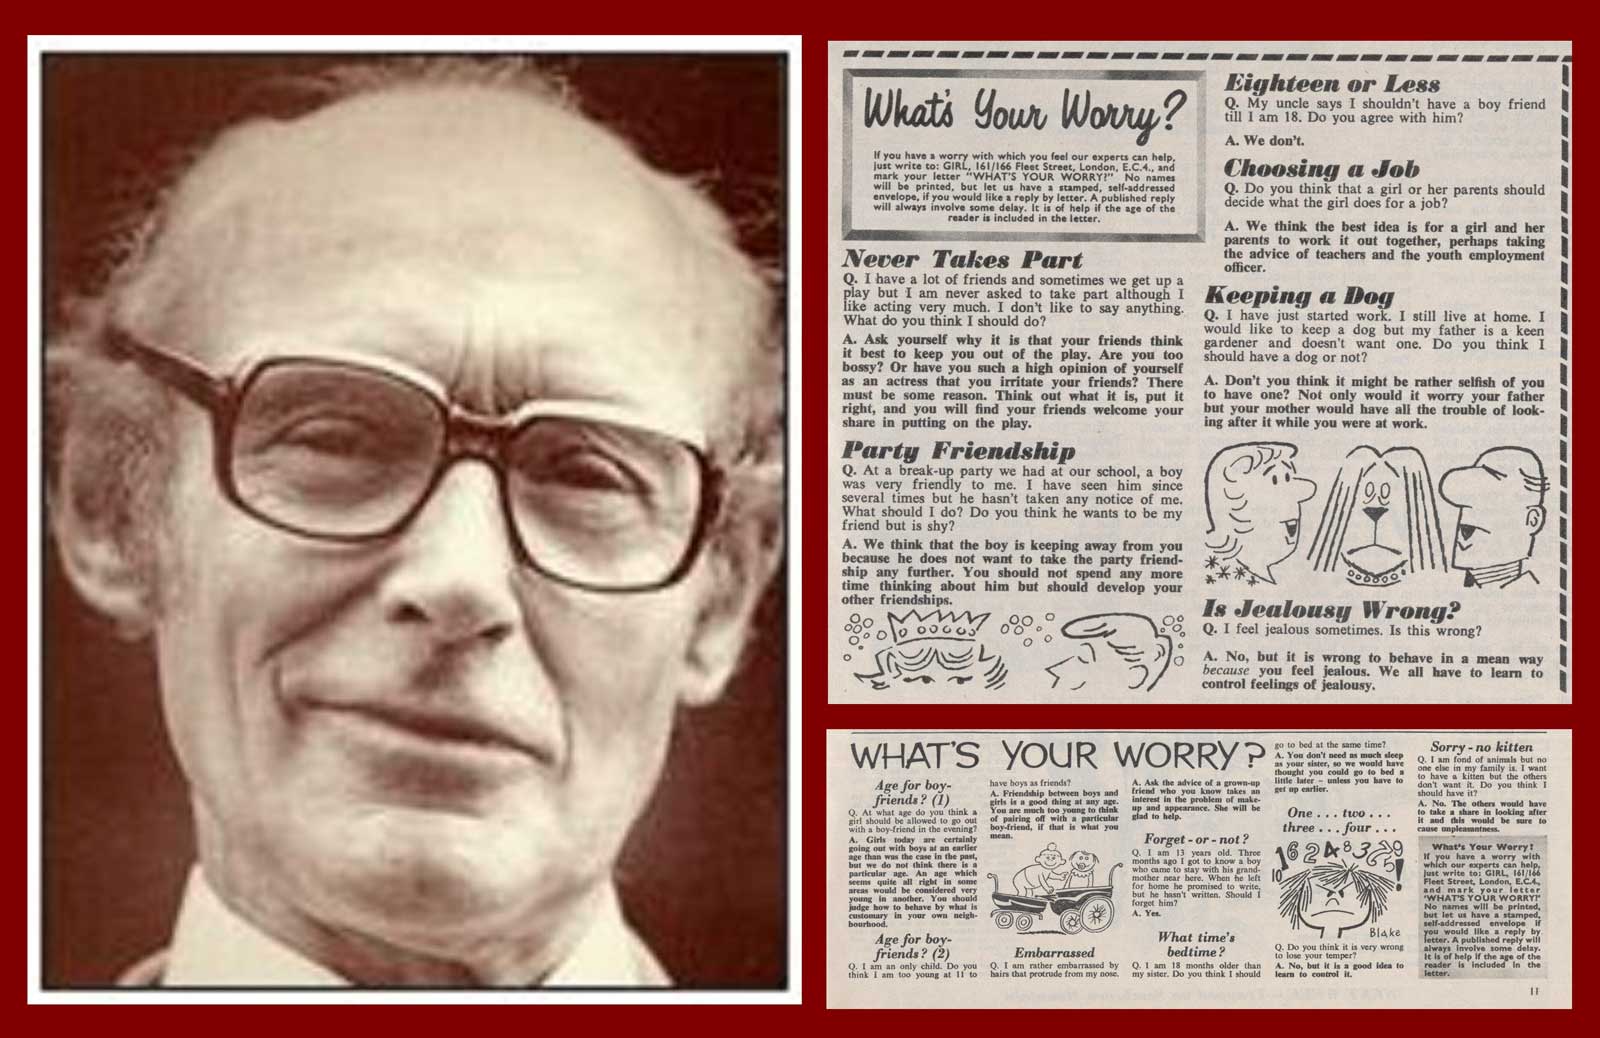 Doctor James Hemming and examples of the "What's Your Worry" problem pages that featured in Girl, with artwork by Brian Blake